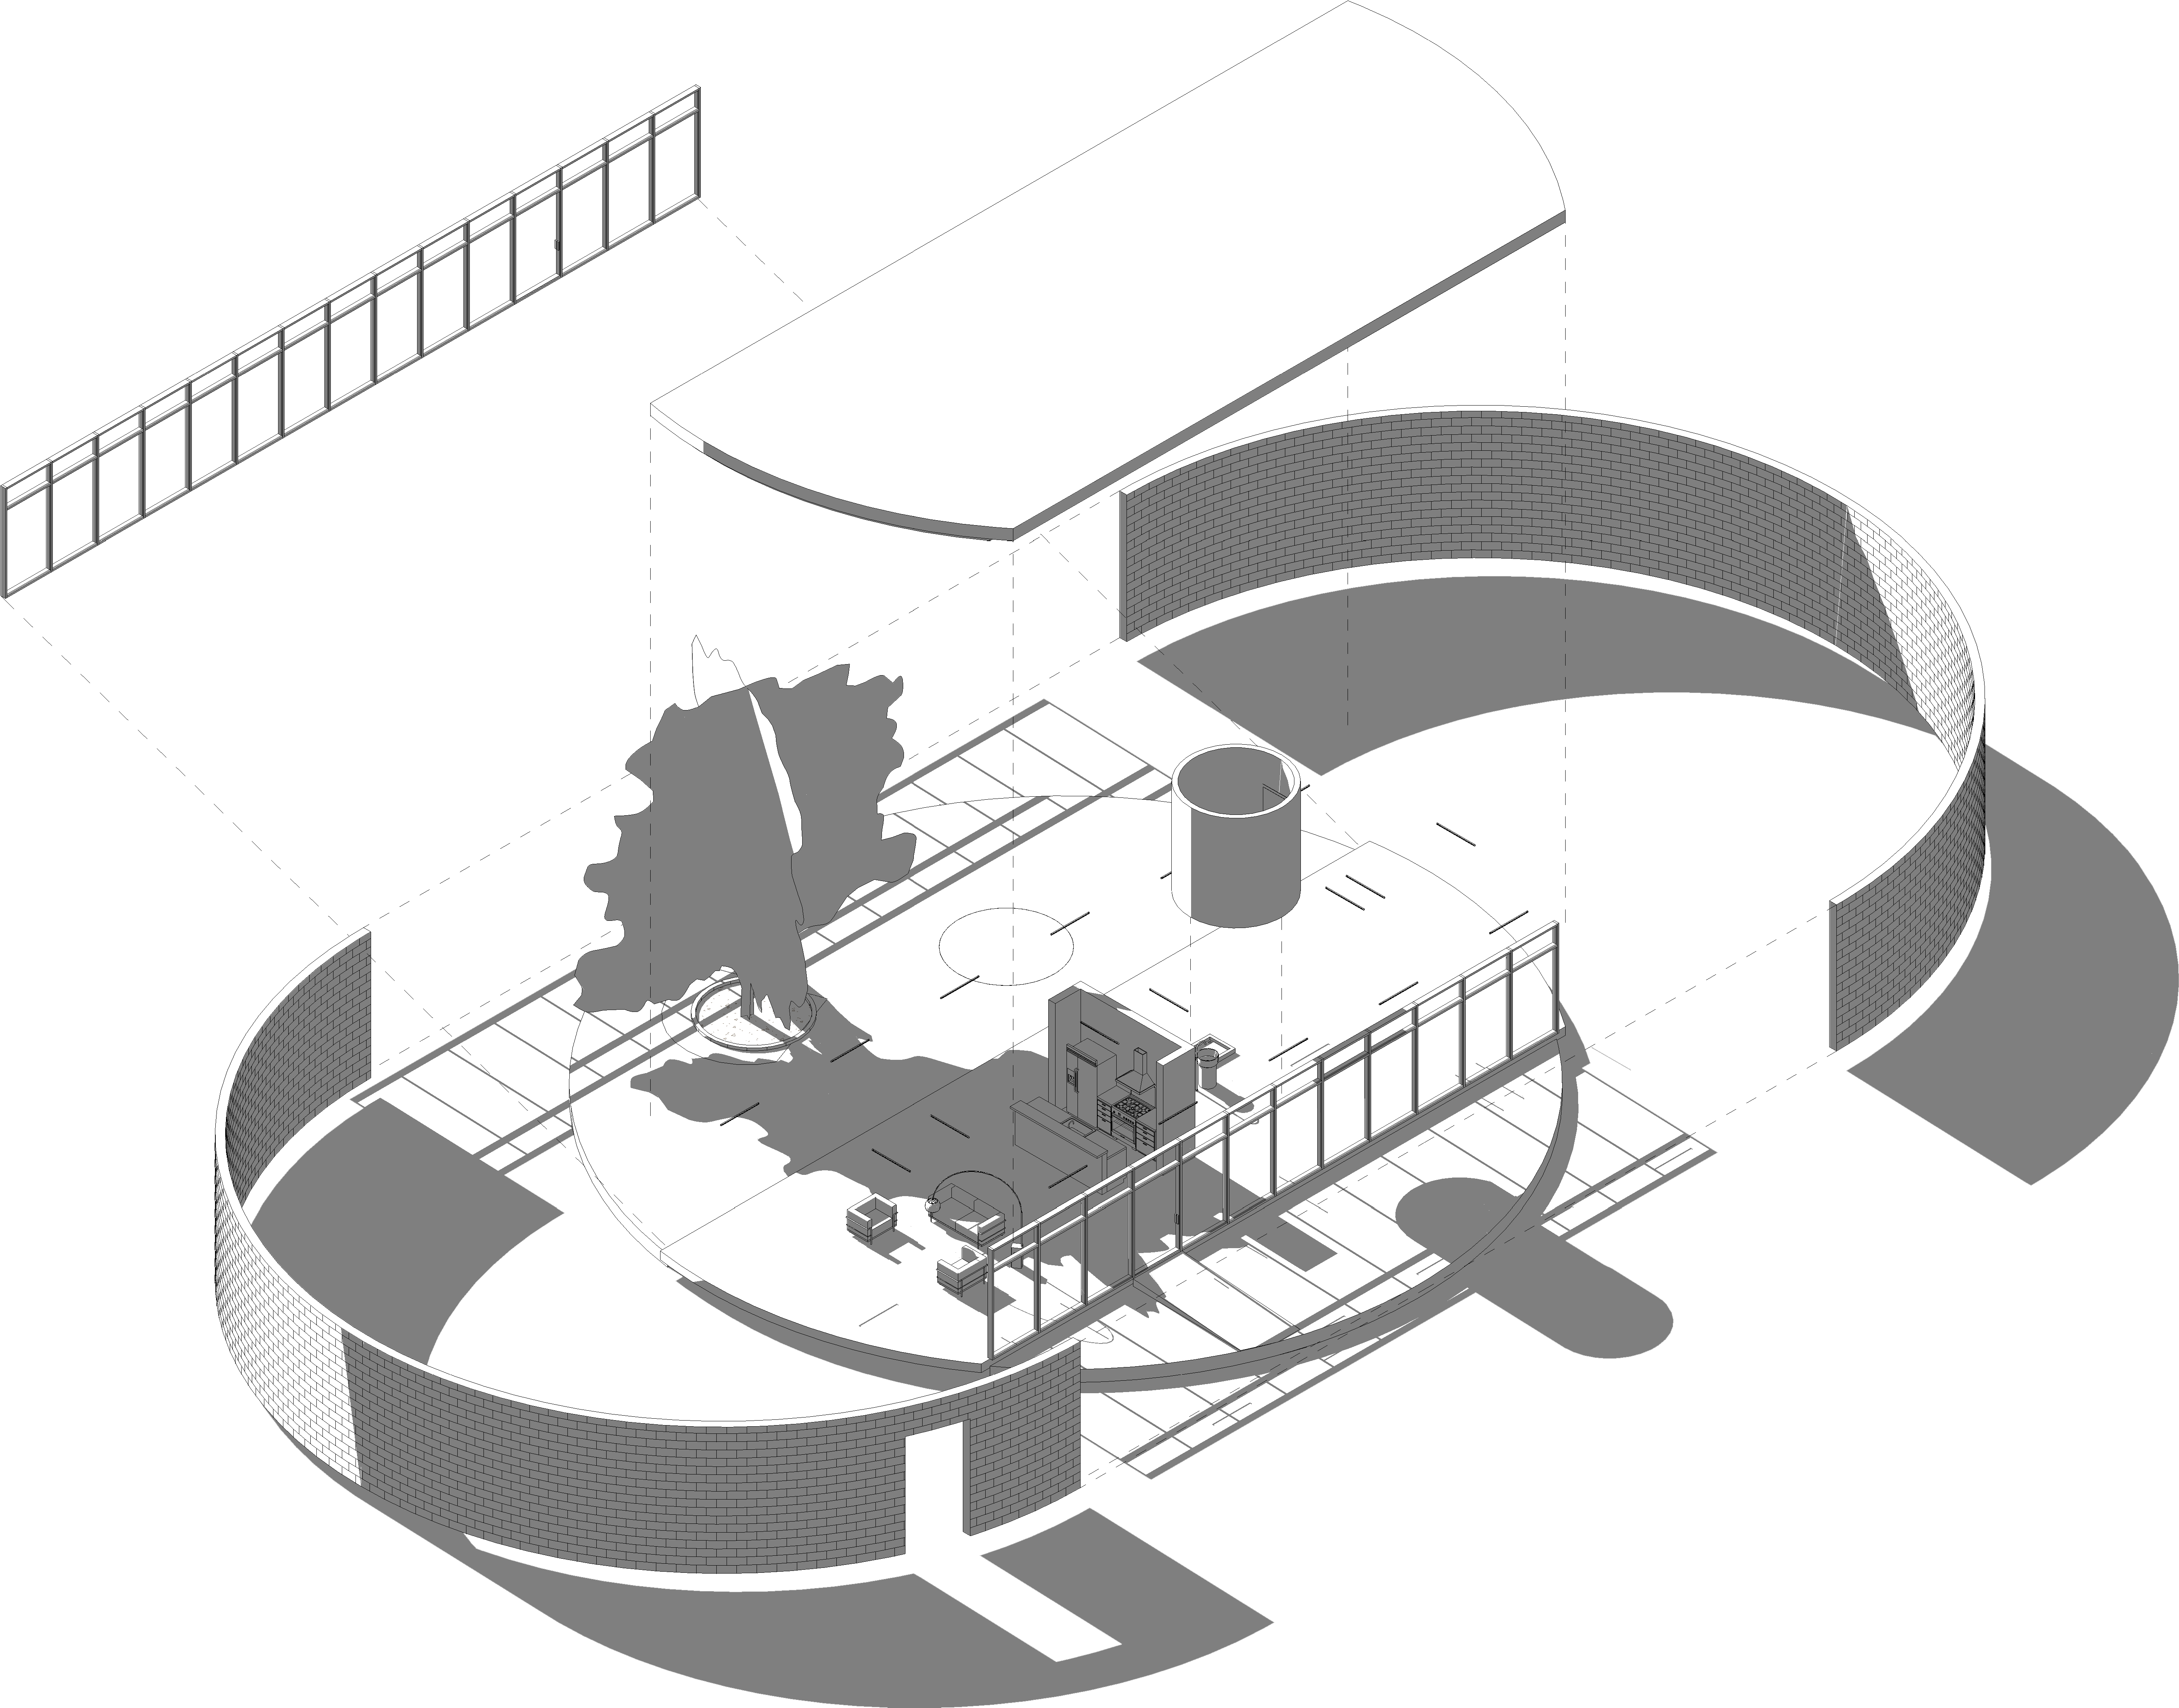 A White Diagram Of A Building